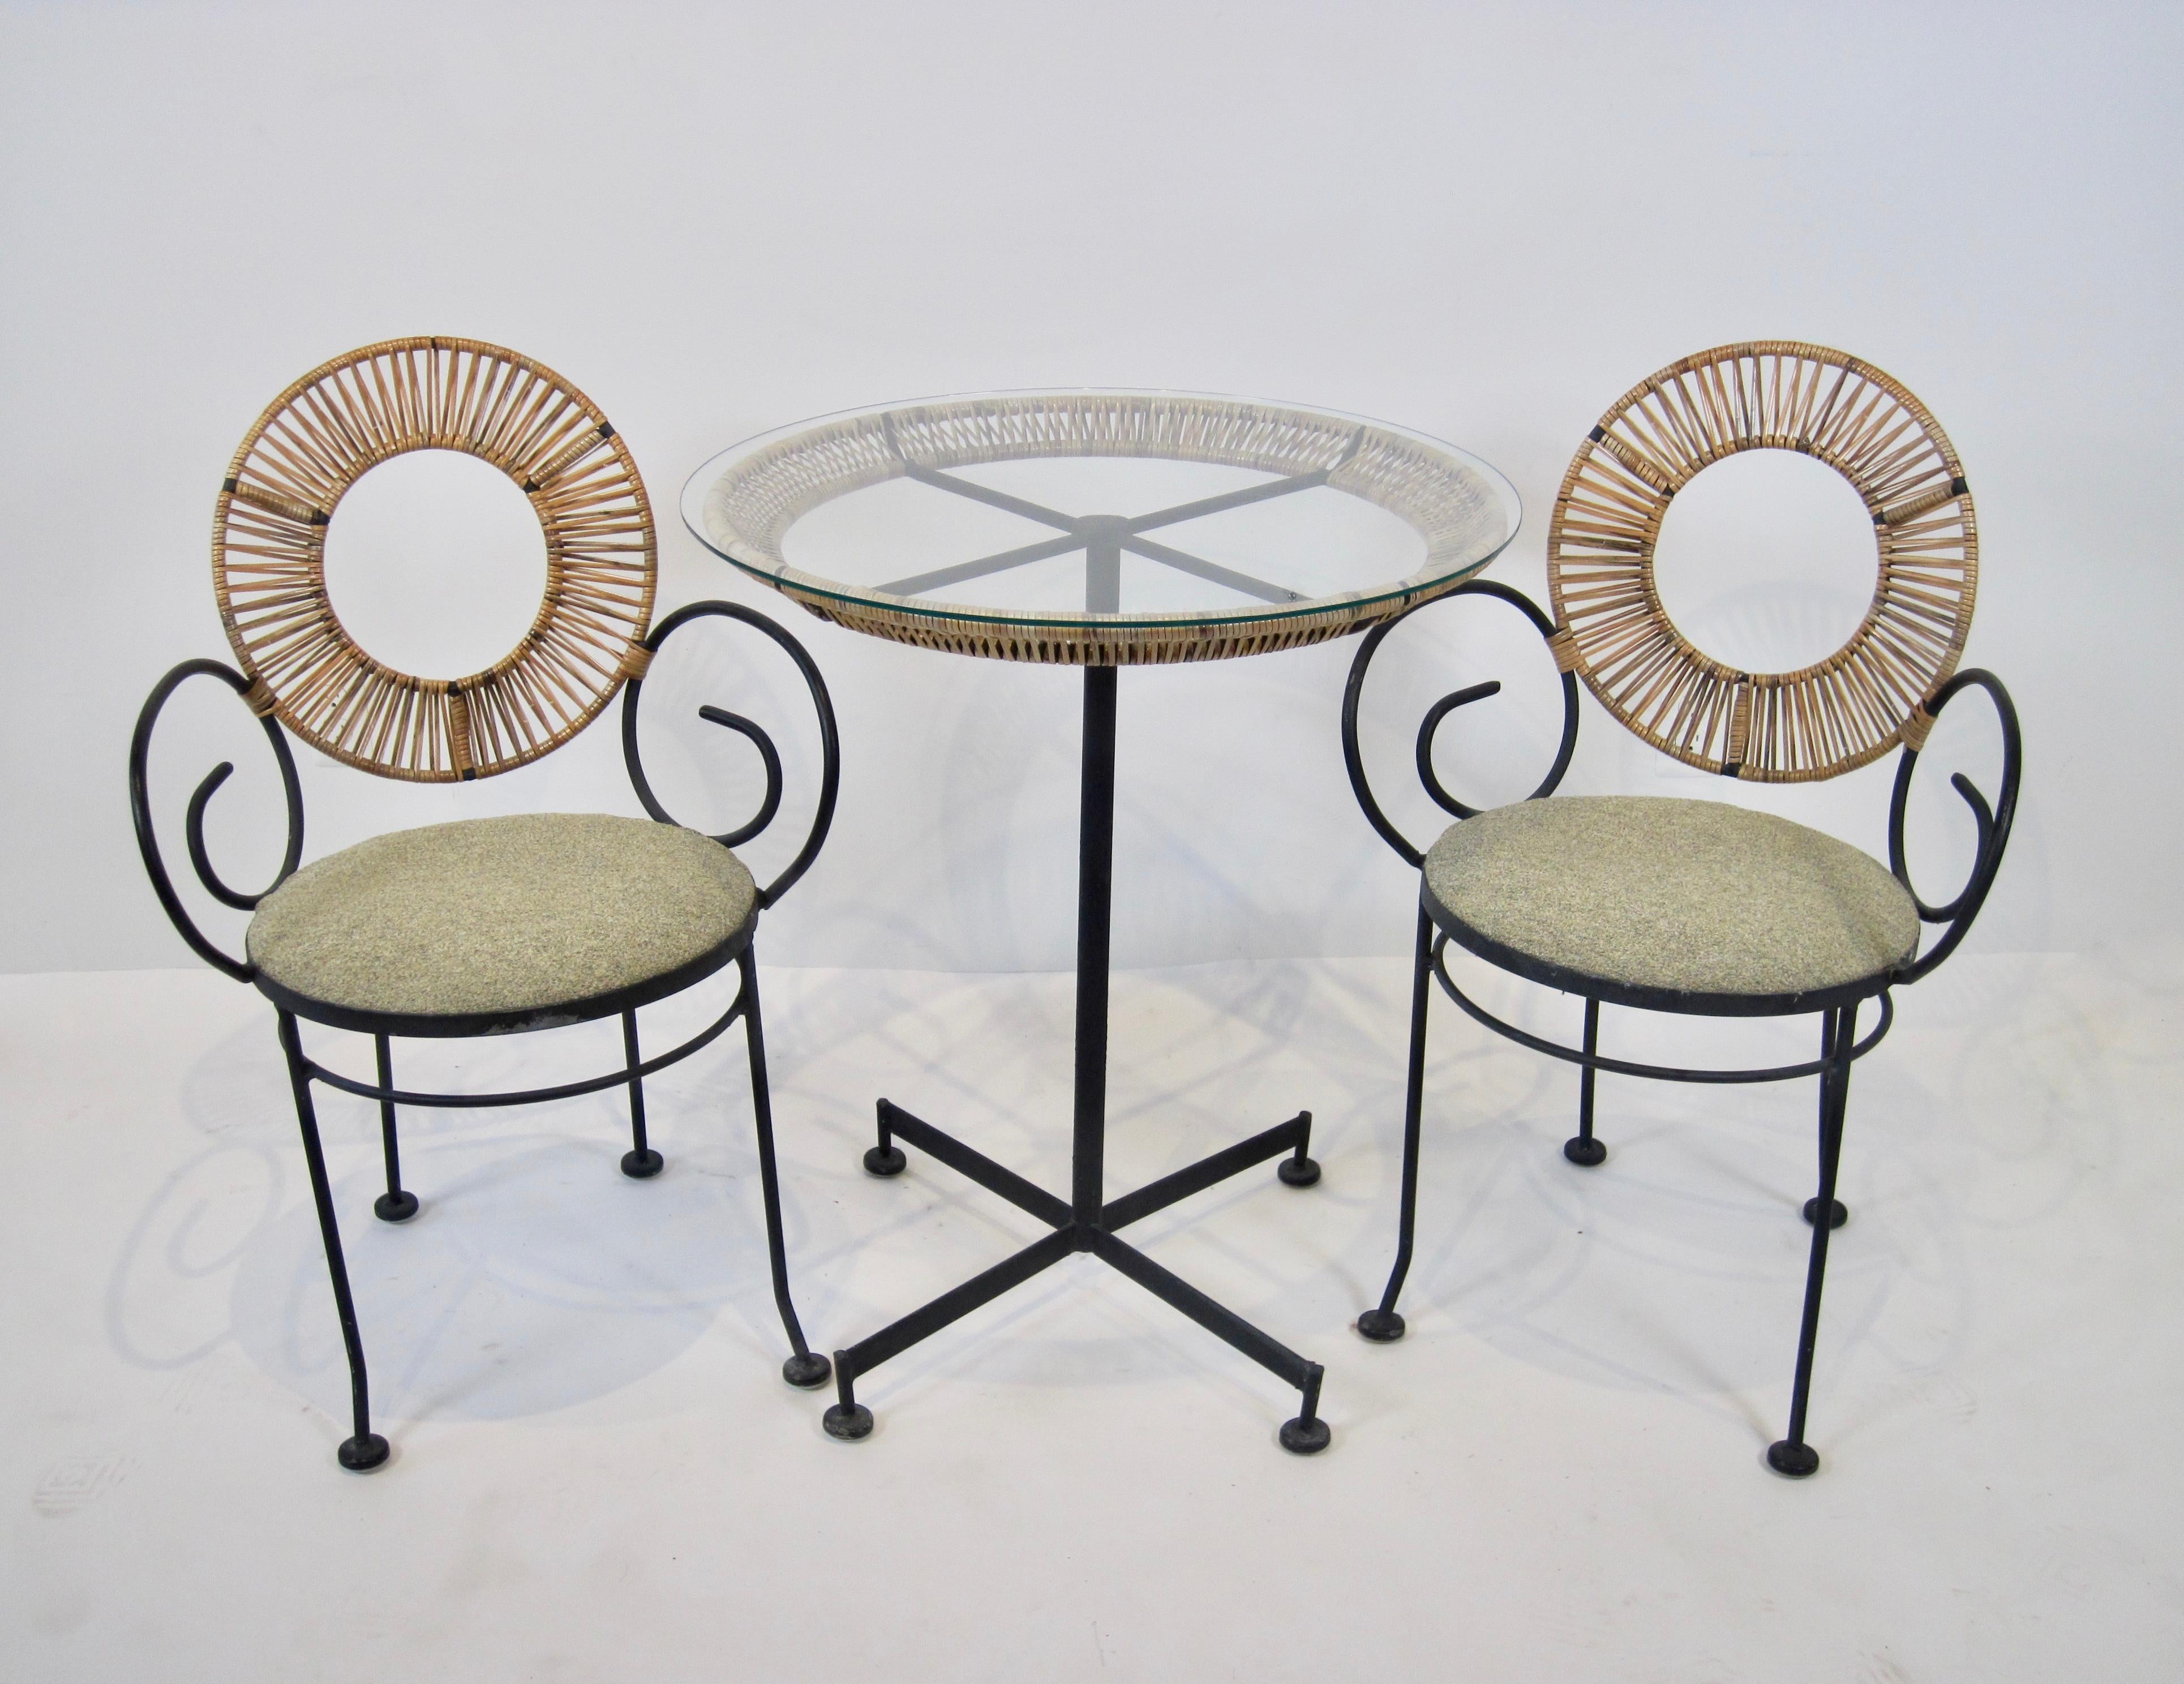 A Mid Century wrought iron bistro set by Arthur Umanoff for Shaver Howard includes a pedestal table with four arm base and raffia wrap on table top with glass overlay. The two scroll arm chairs have raffia wrapped circular backs and round cushioned